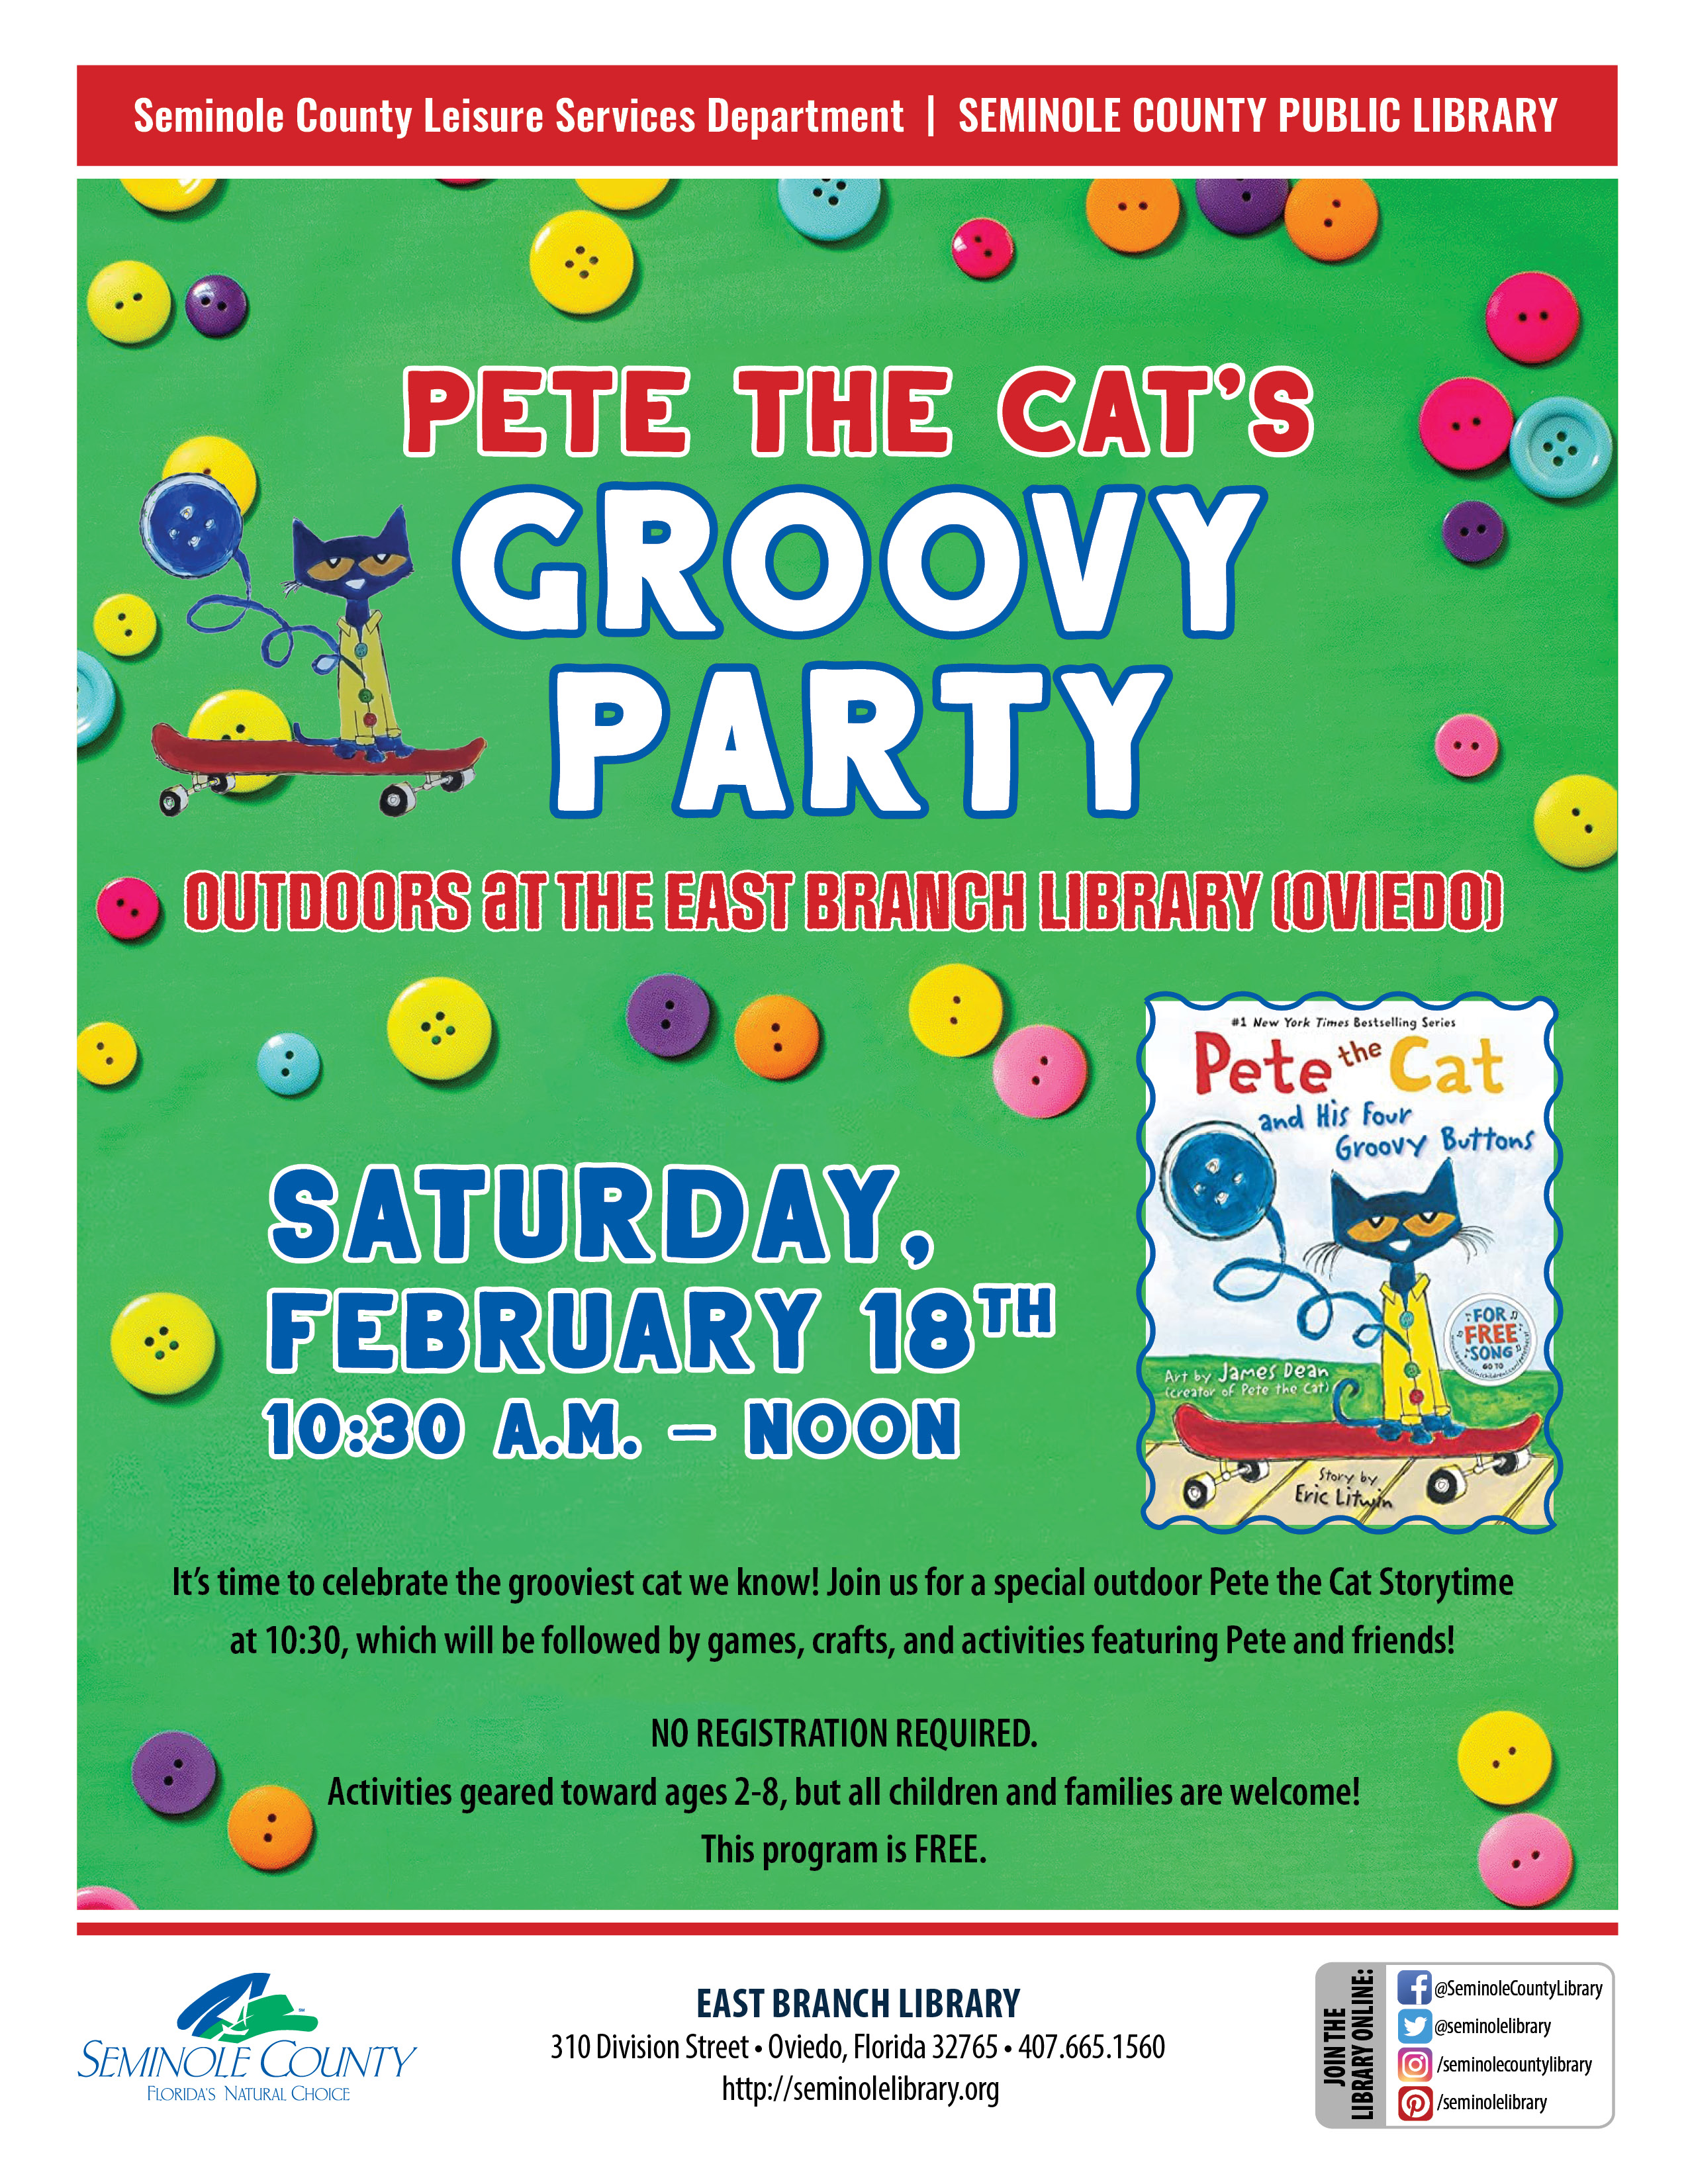 Pete the Cat's Groovy Party - East Branch Library